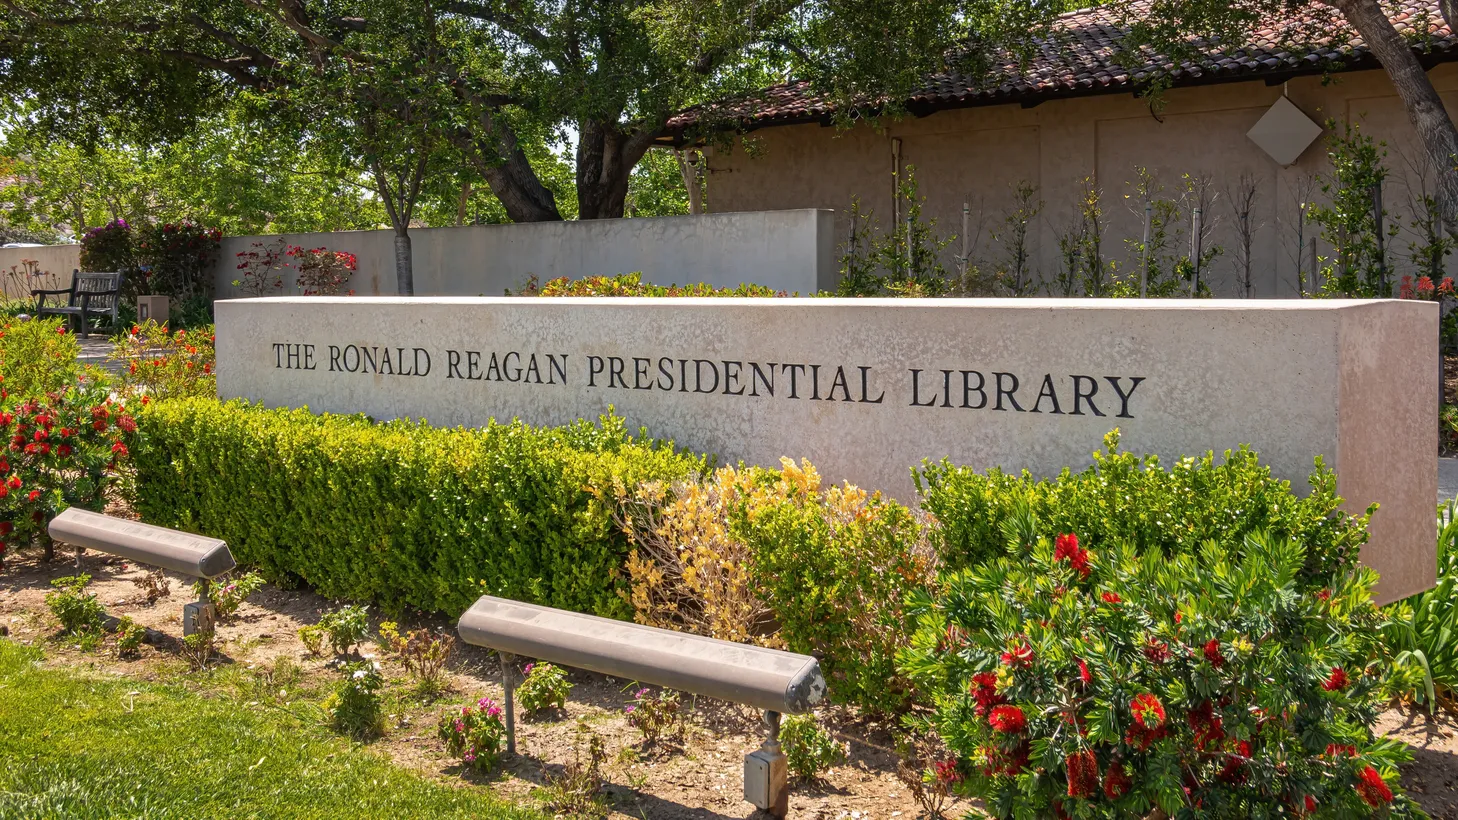 The Ronald Reagan Presidential Library and Museum is host to everything from political debates and scholarly research to high school proms and summer concerts.